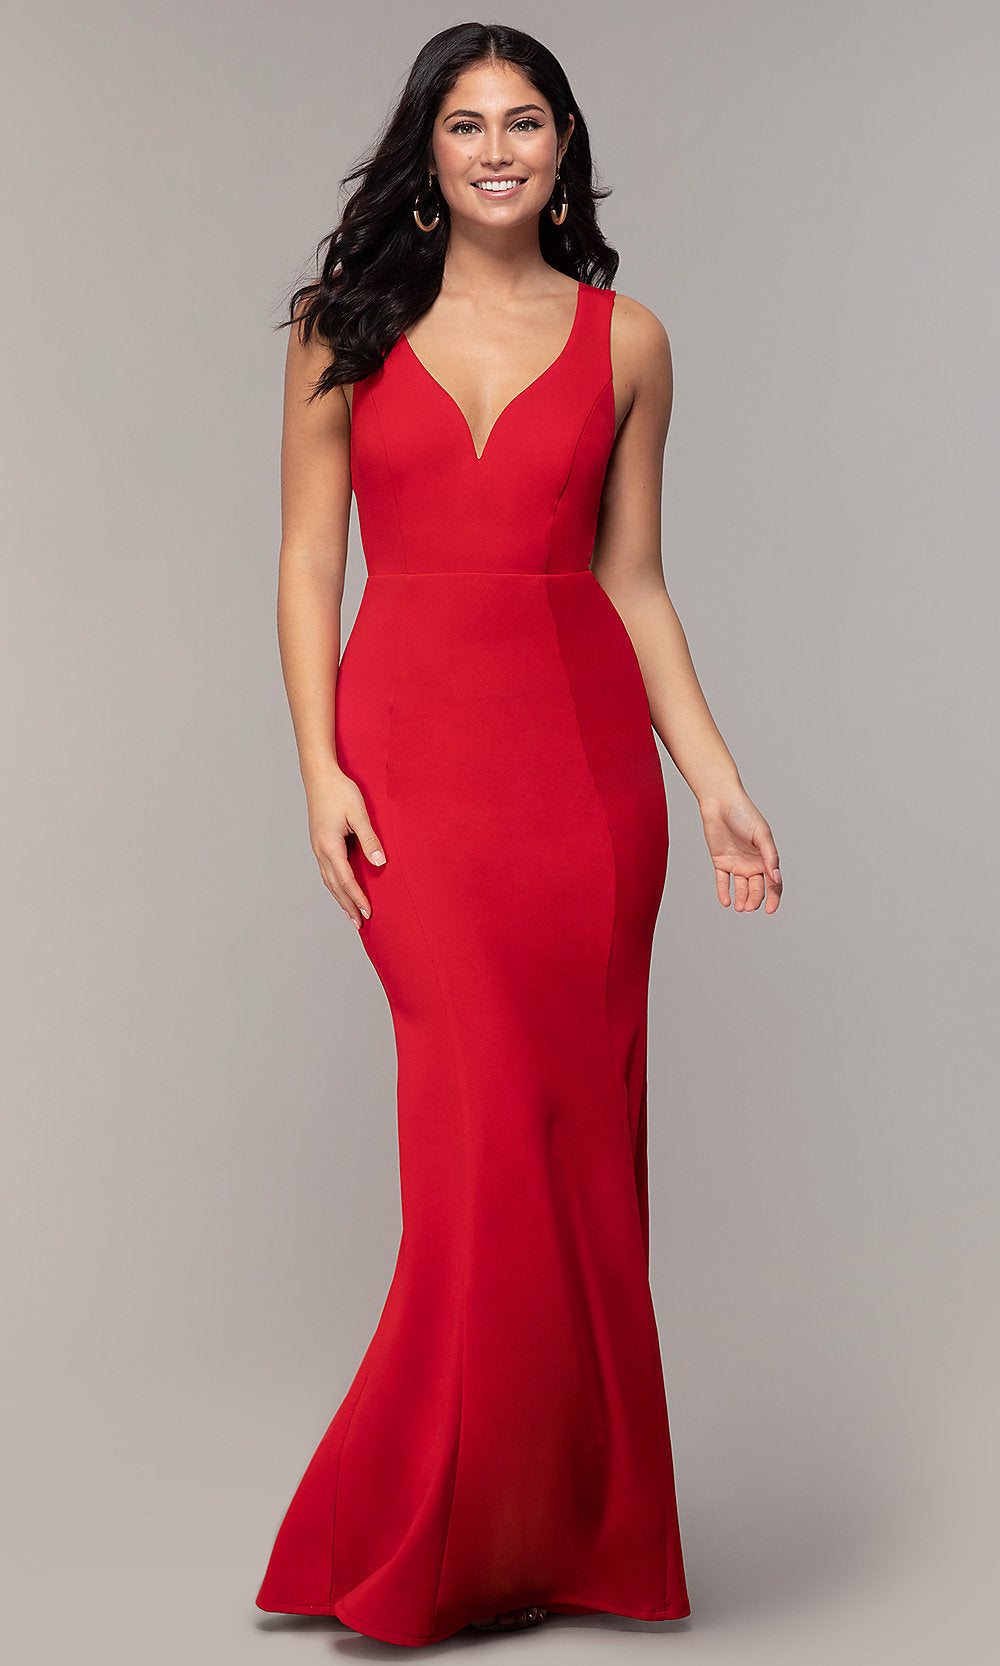 Cherry Red V-Neck Long Formal Mermaid Dress by Simply